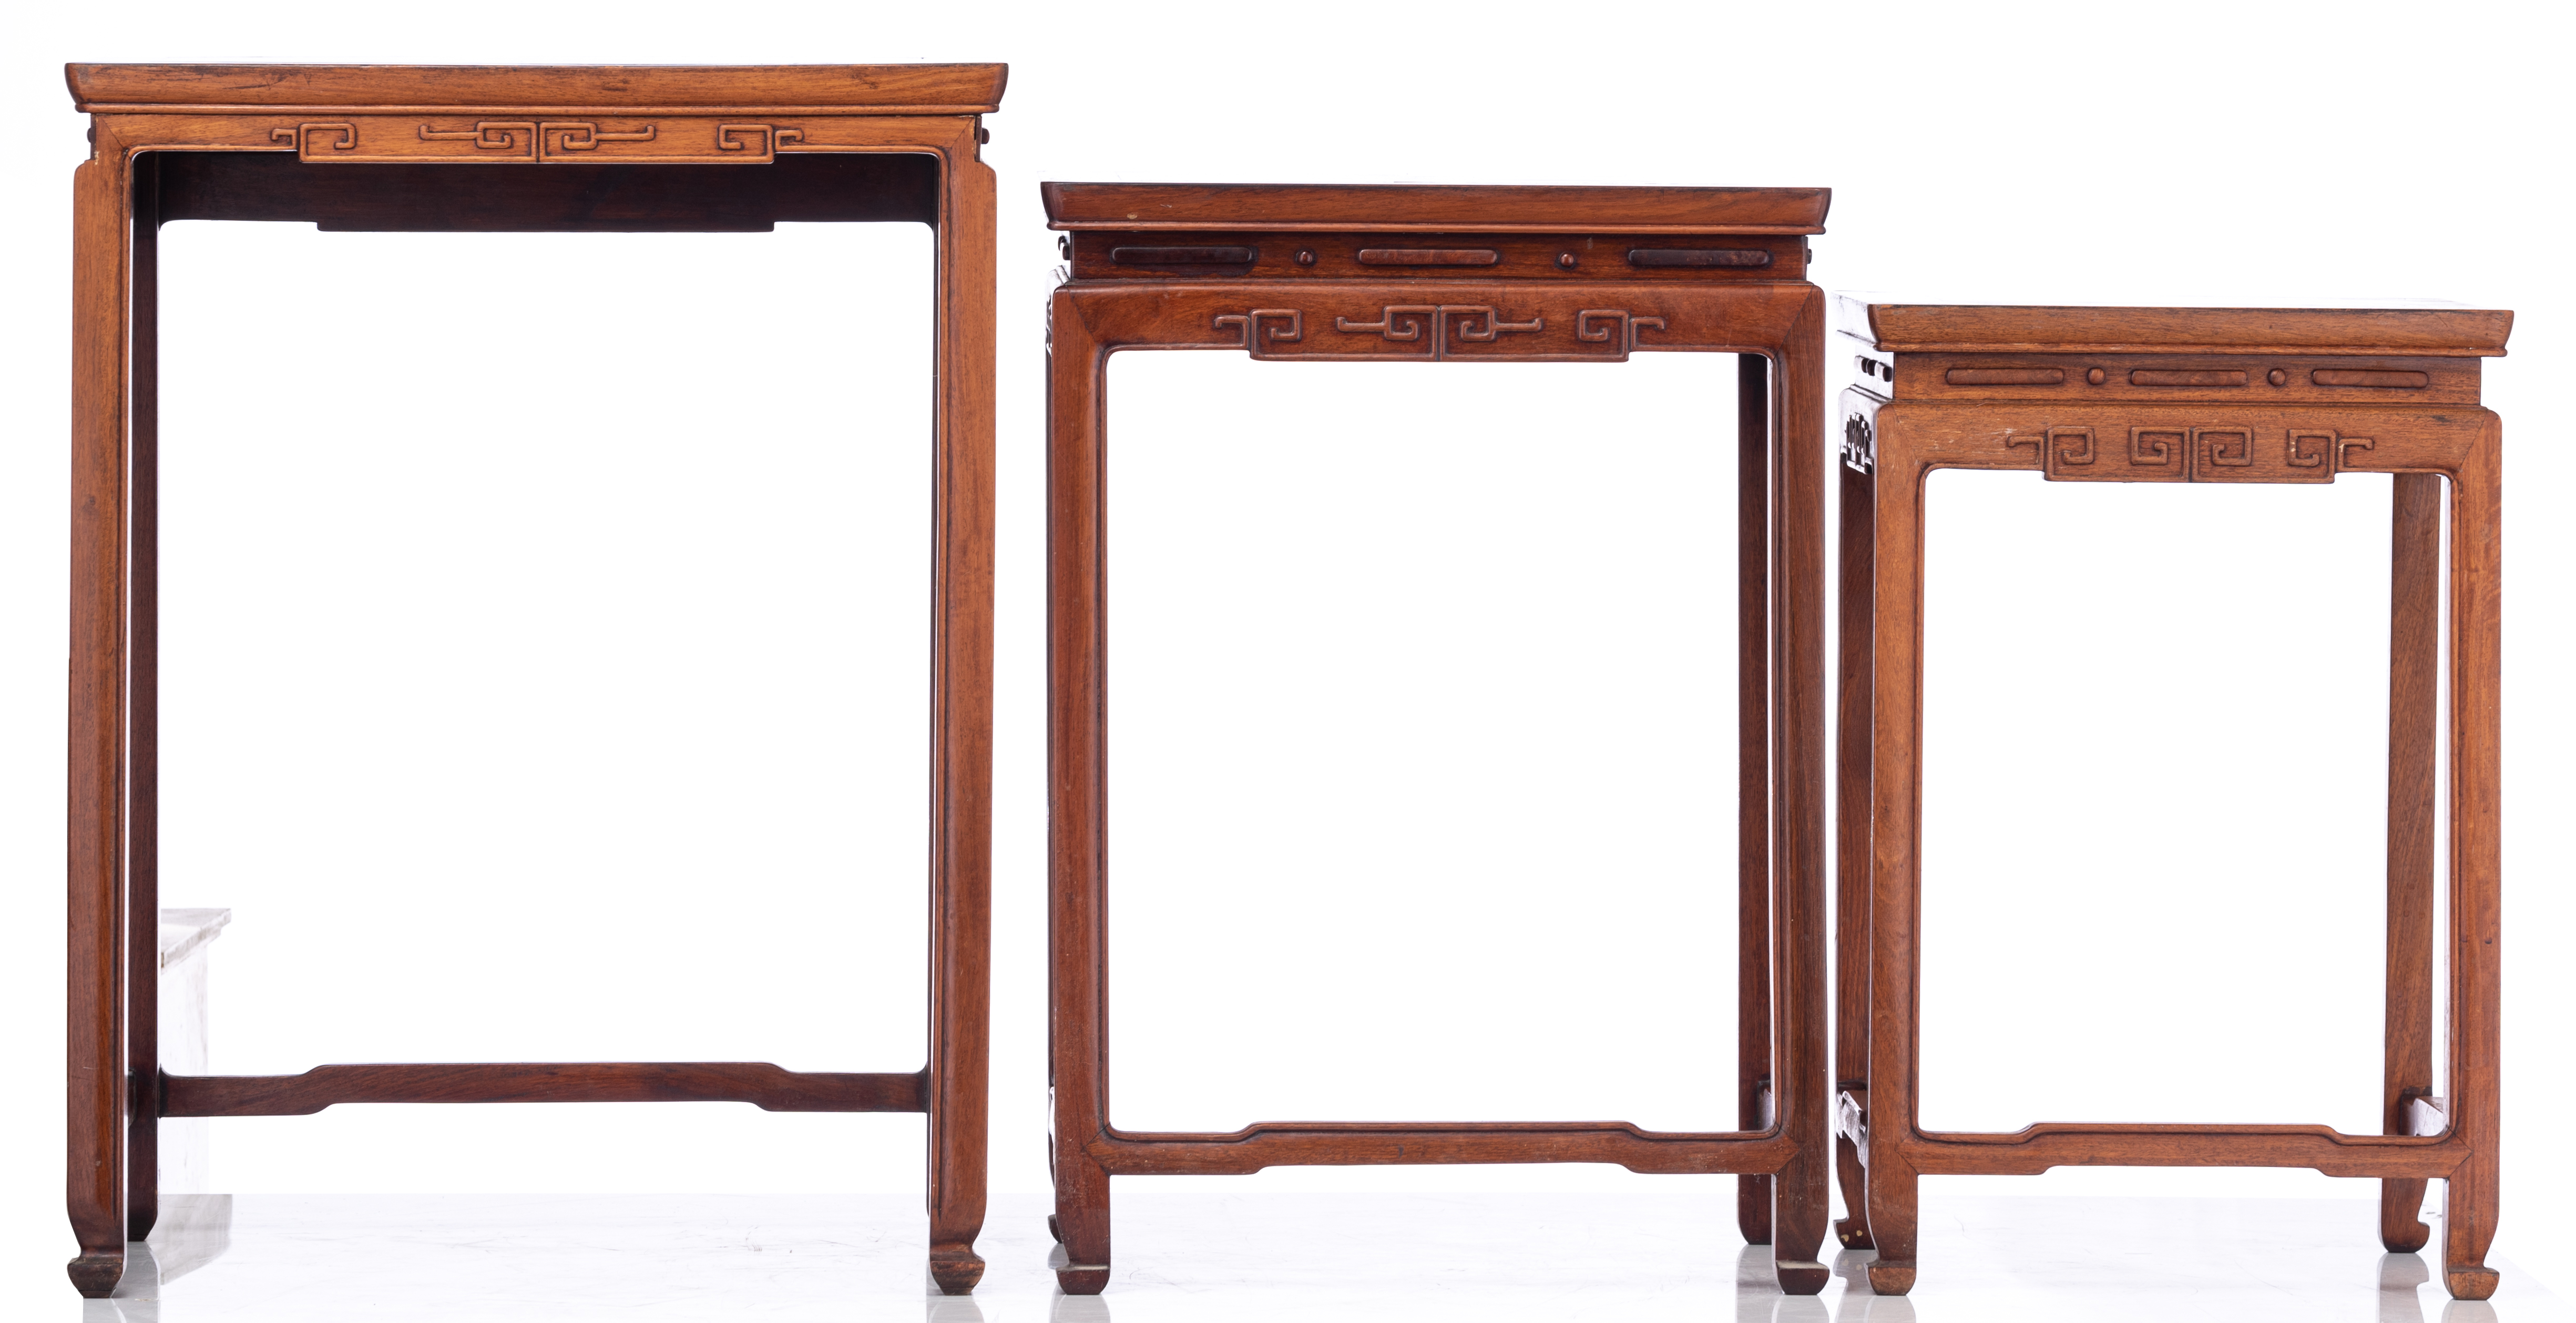 A set of three Chinese nesting tables, H 53,5 - 66,5 cm - Image 4 of 7